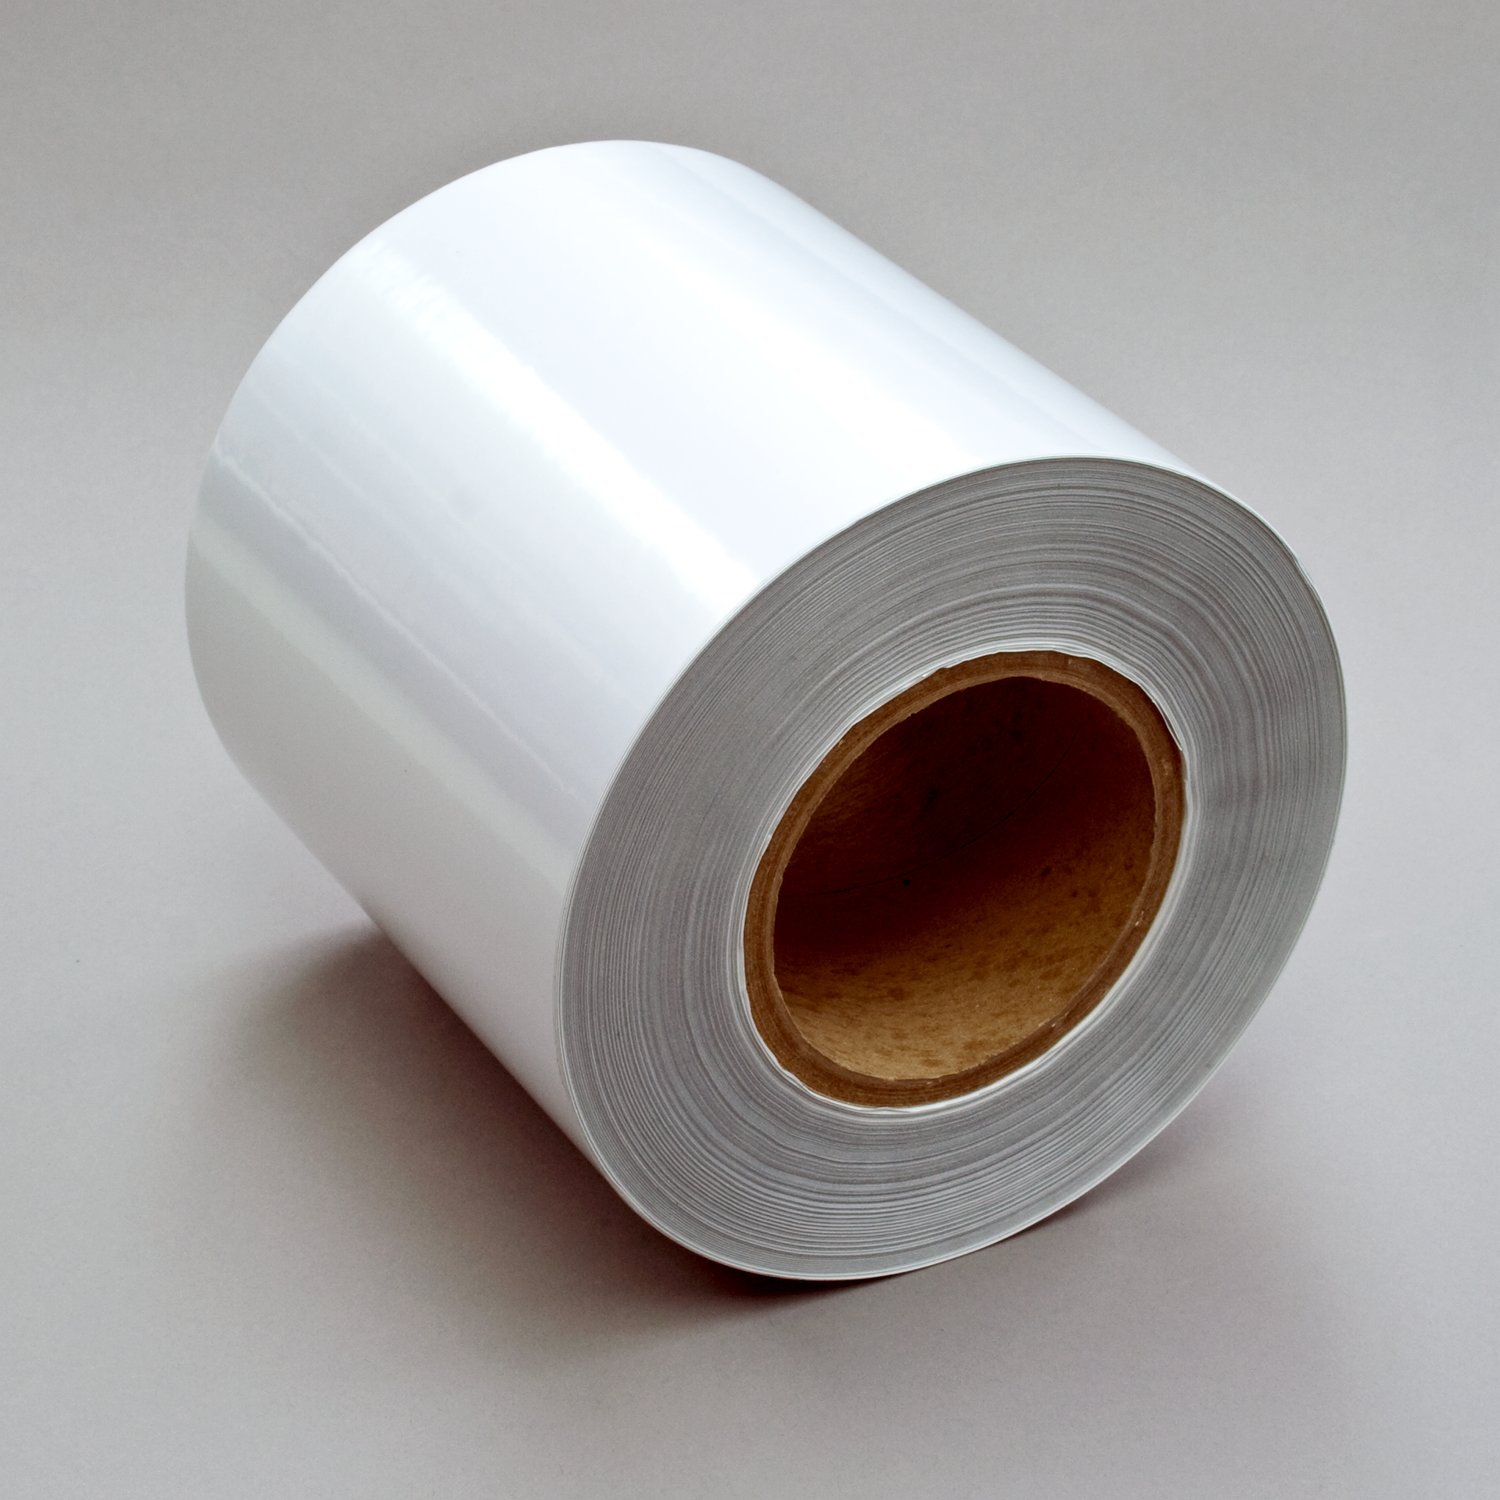 7000048588 - 3M Thermal Transfer Label Material 7875, Platinum Polyester Gloss, 6 in
x 1668 ft, 1 Roll/Case